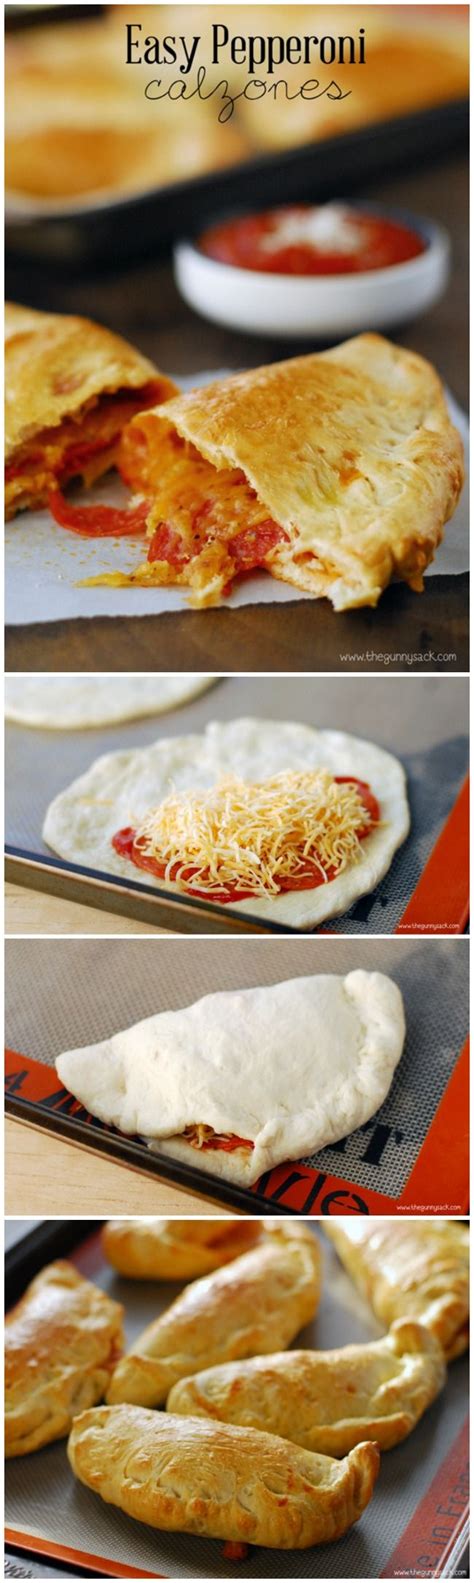 Pepperoni Calzones Are Easy To Make With Frozen Bread Dough And The